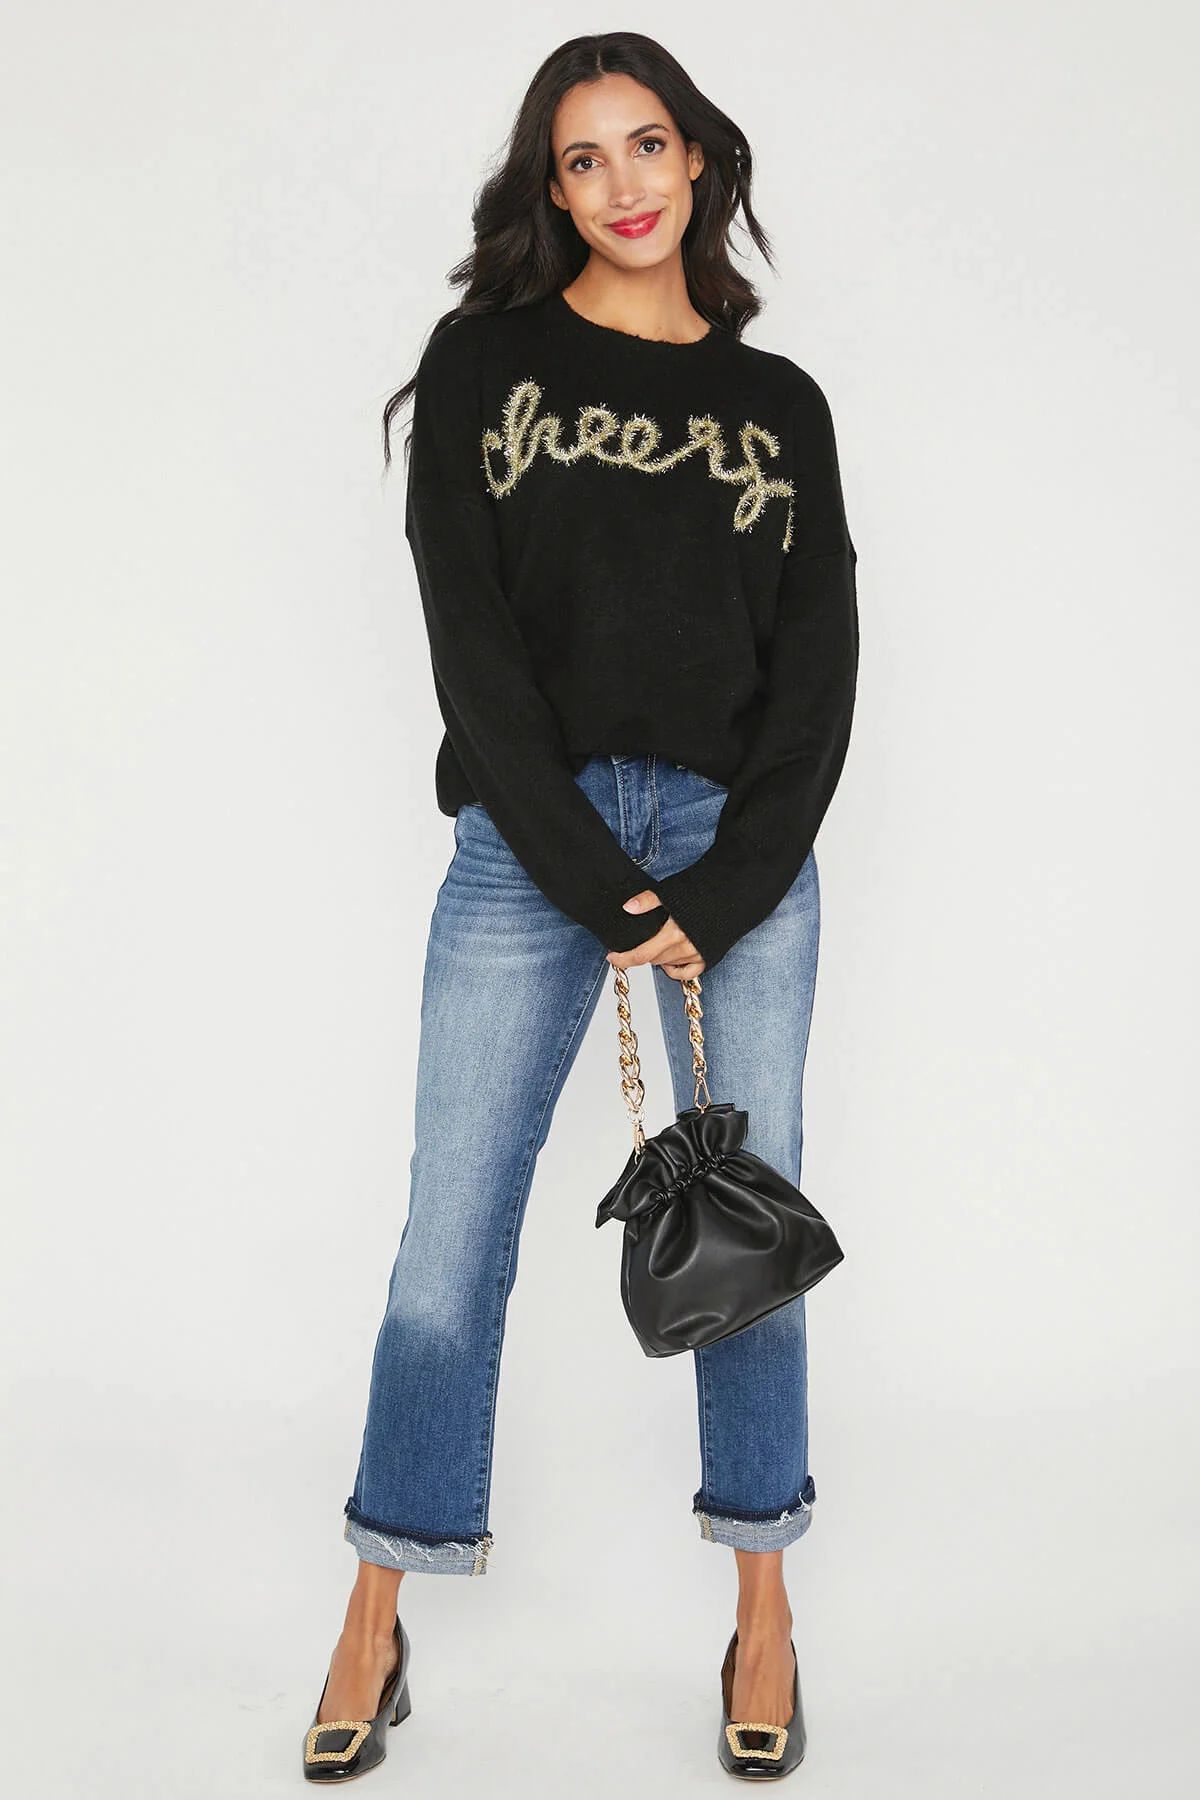 Gilli Cheers Sweater | Social Threads